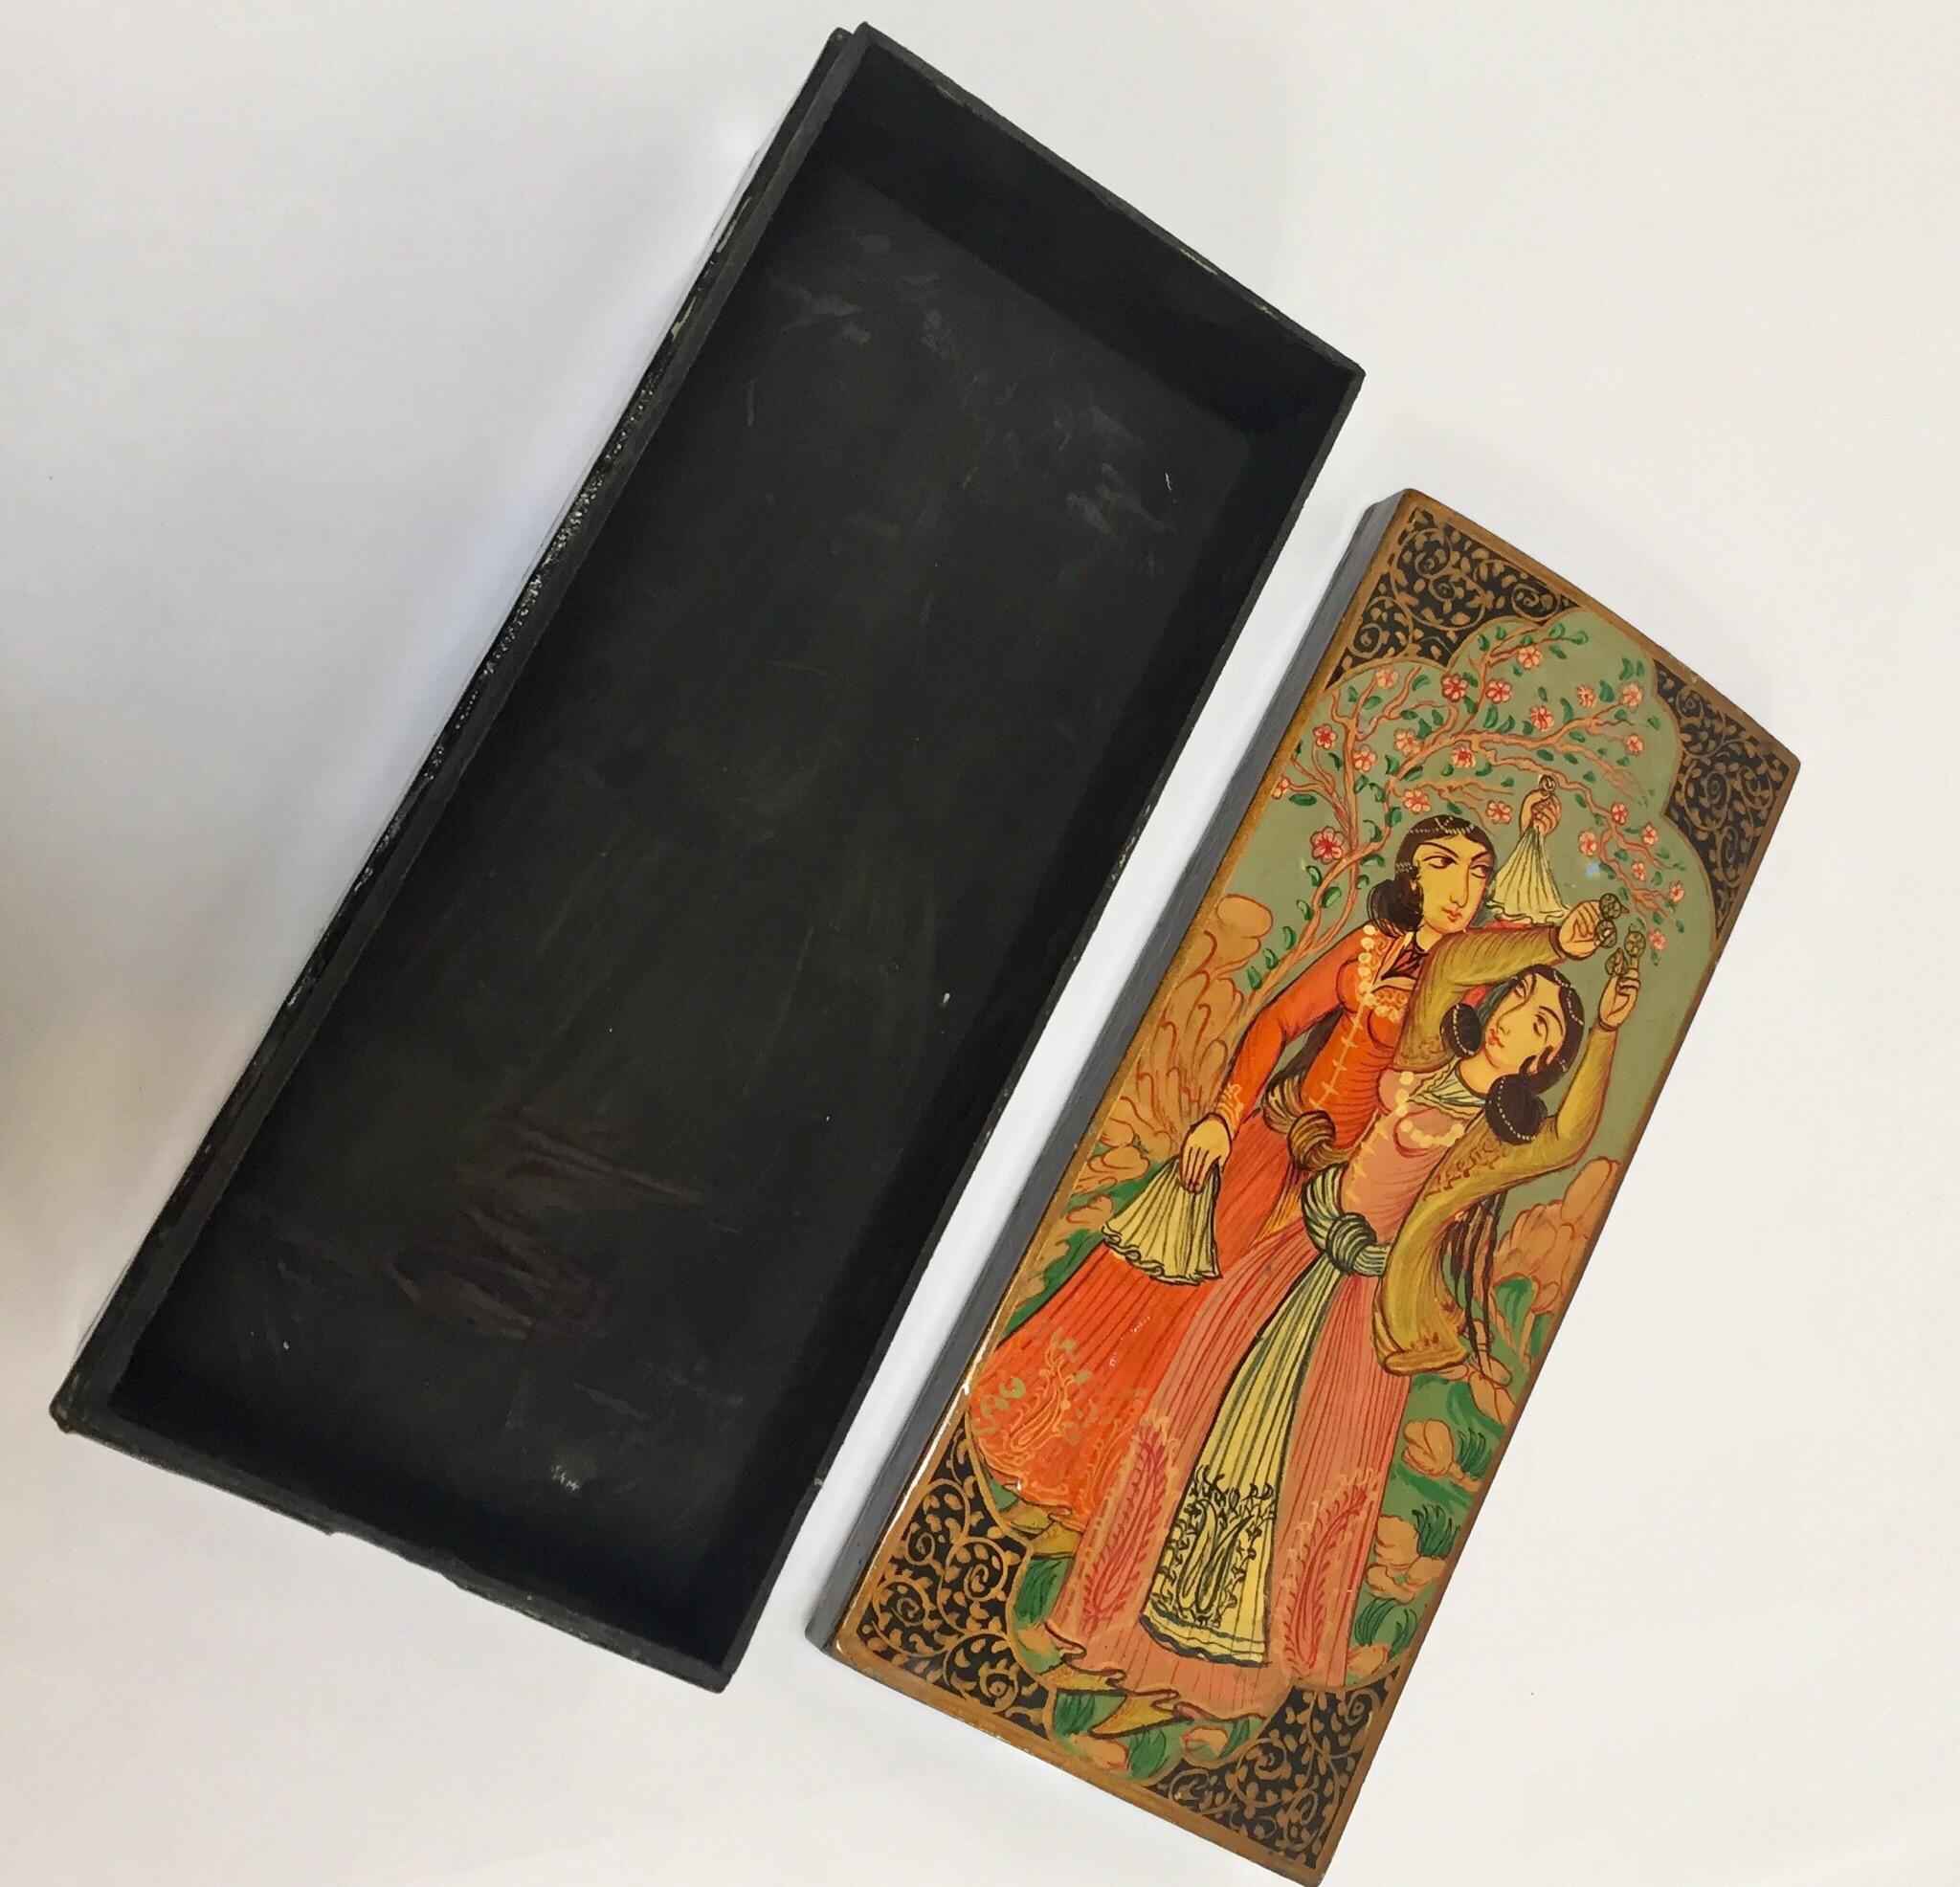 Hand painted lacquer pen box in rectangular shape with lid.
Decorated with a figural 17th century scene and floral designs on sides on black background.
Pen box hand painted with harem young girls wearing 17th century clothes playing and dancing